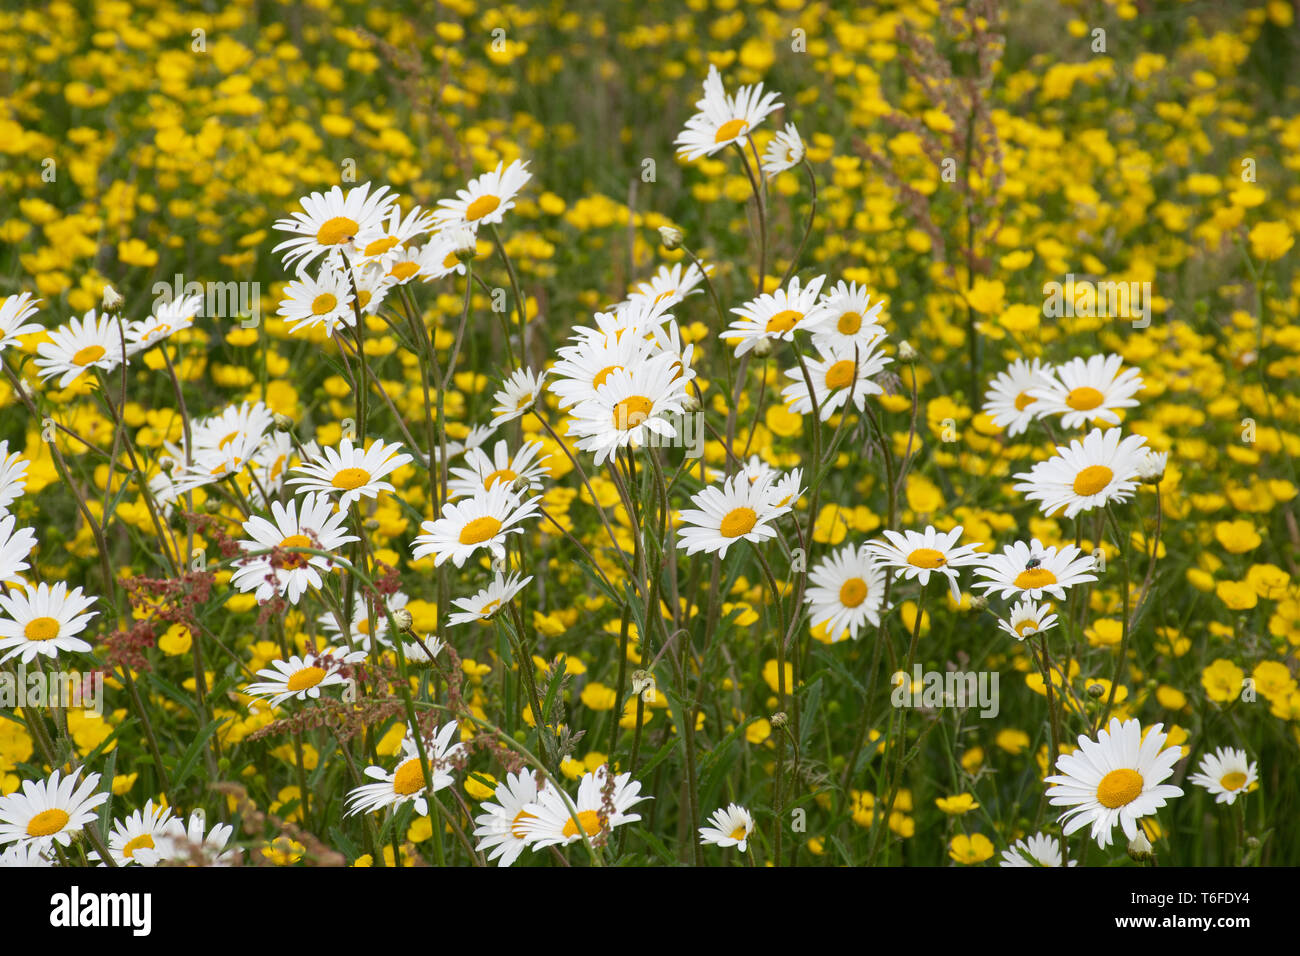 Large group of wild daises with buttercups Stock Photo